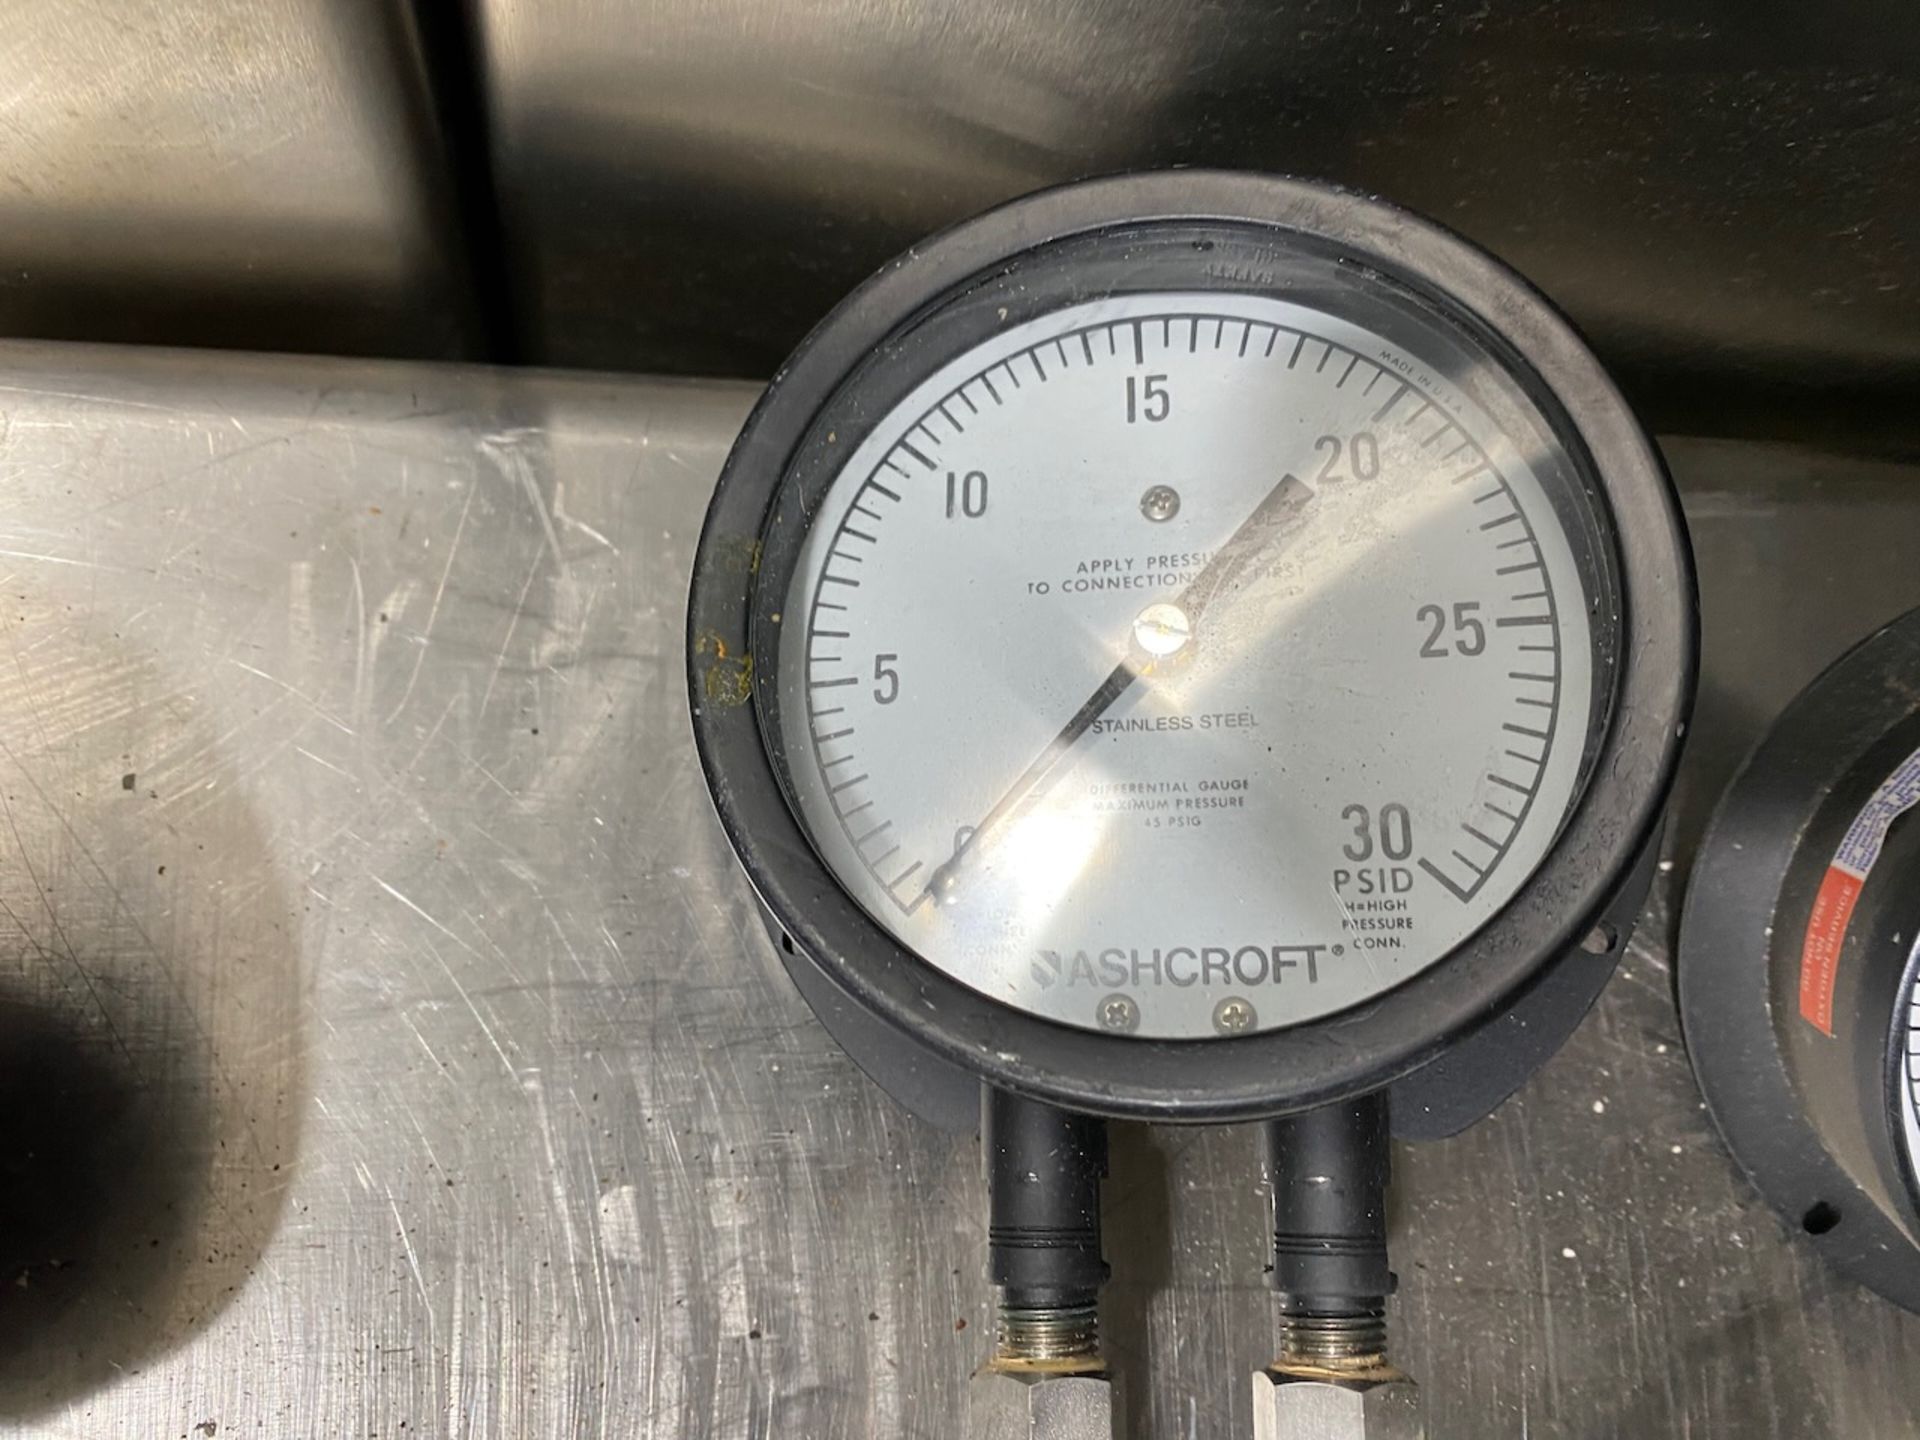 Lot of Pressure and Temperature Gauges - Image 4 of 9